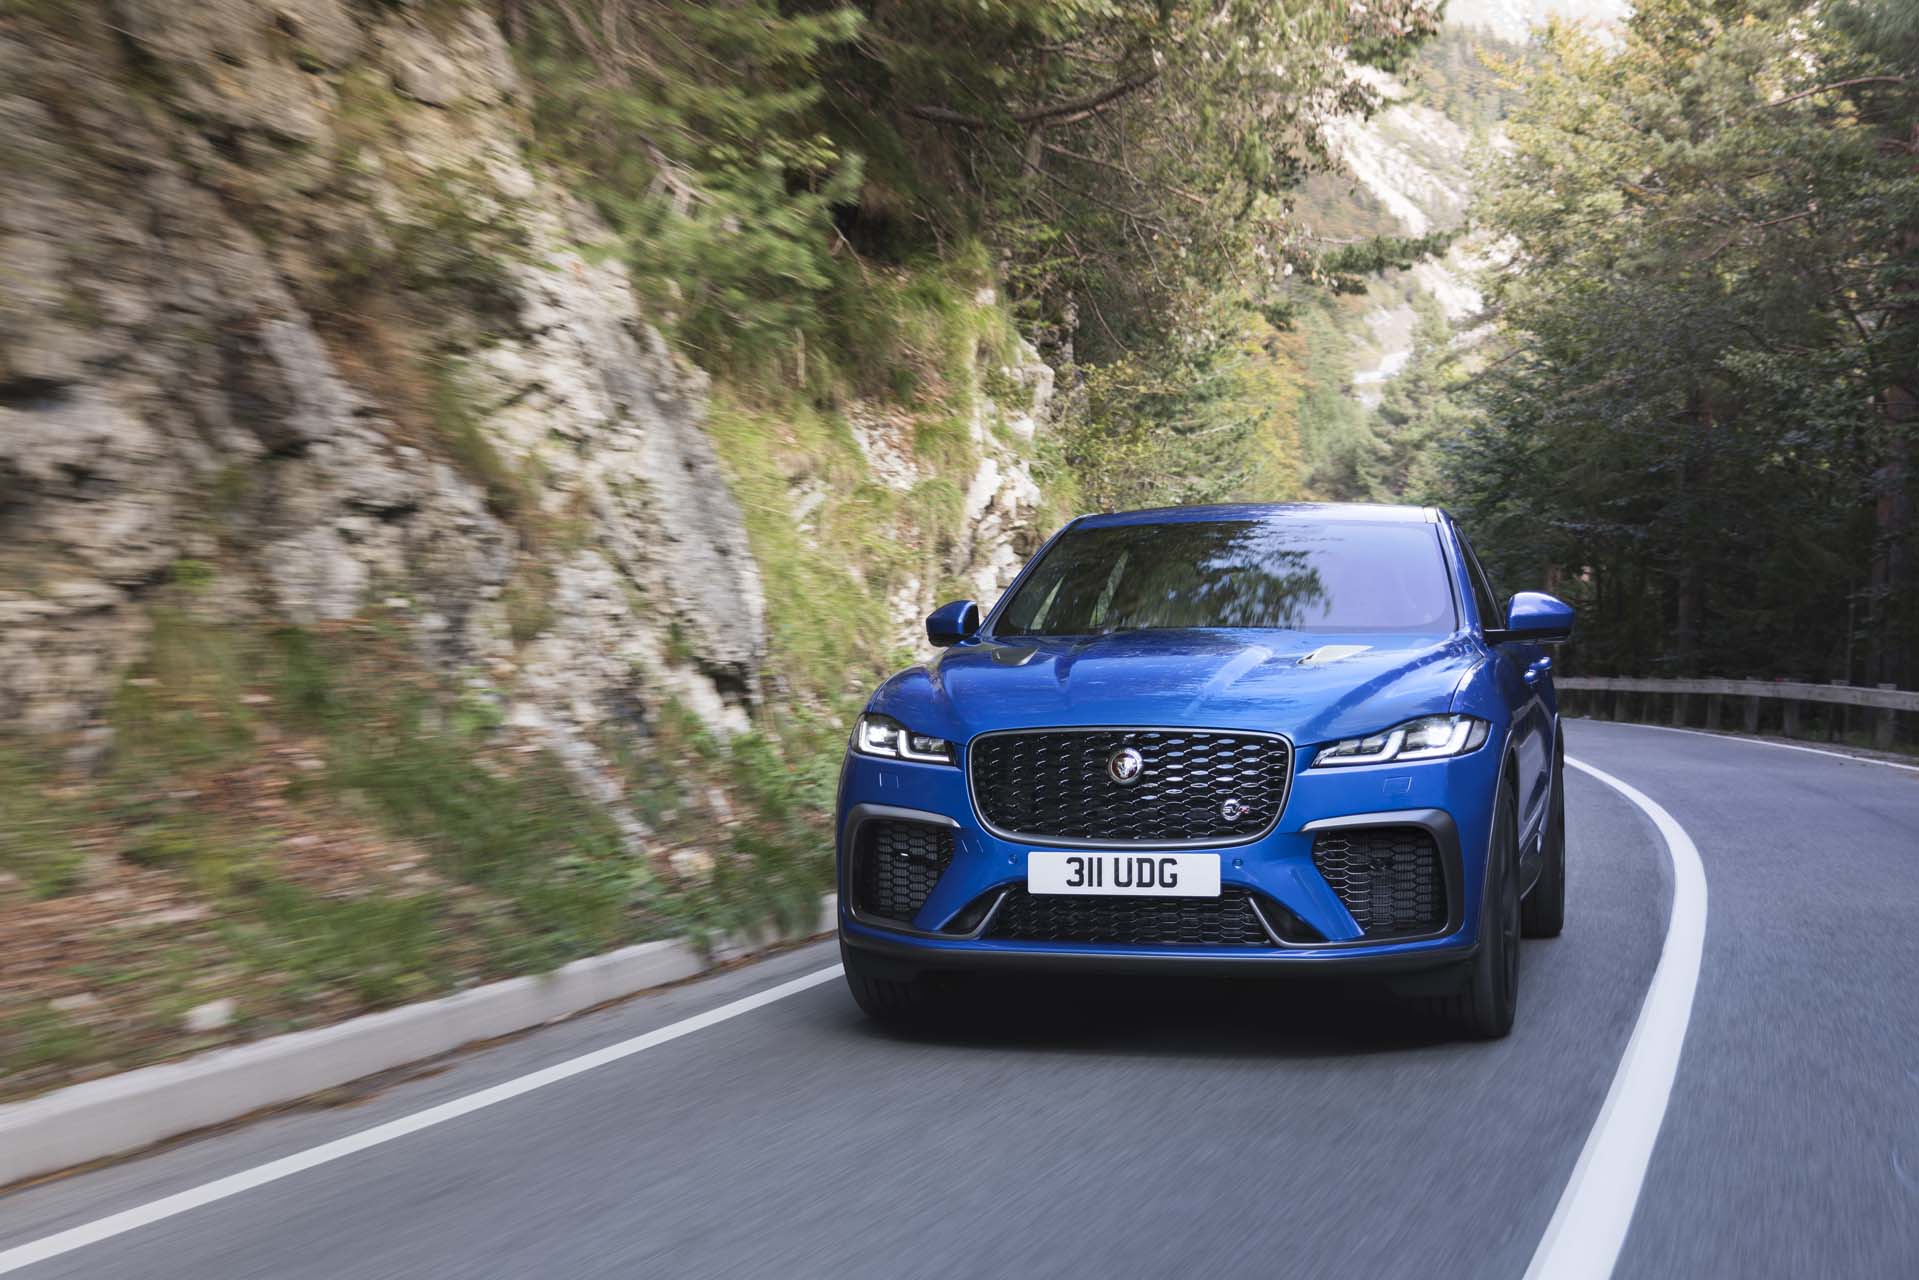 21 Jaguar F Pace Svr Arrives With Extra Grunt From Supercharged V 8